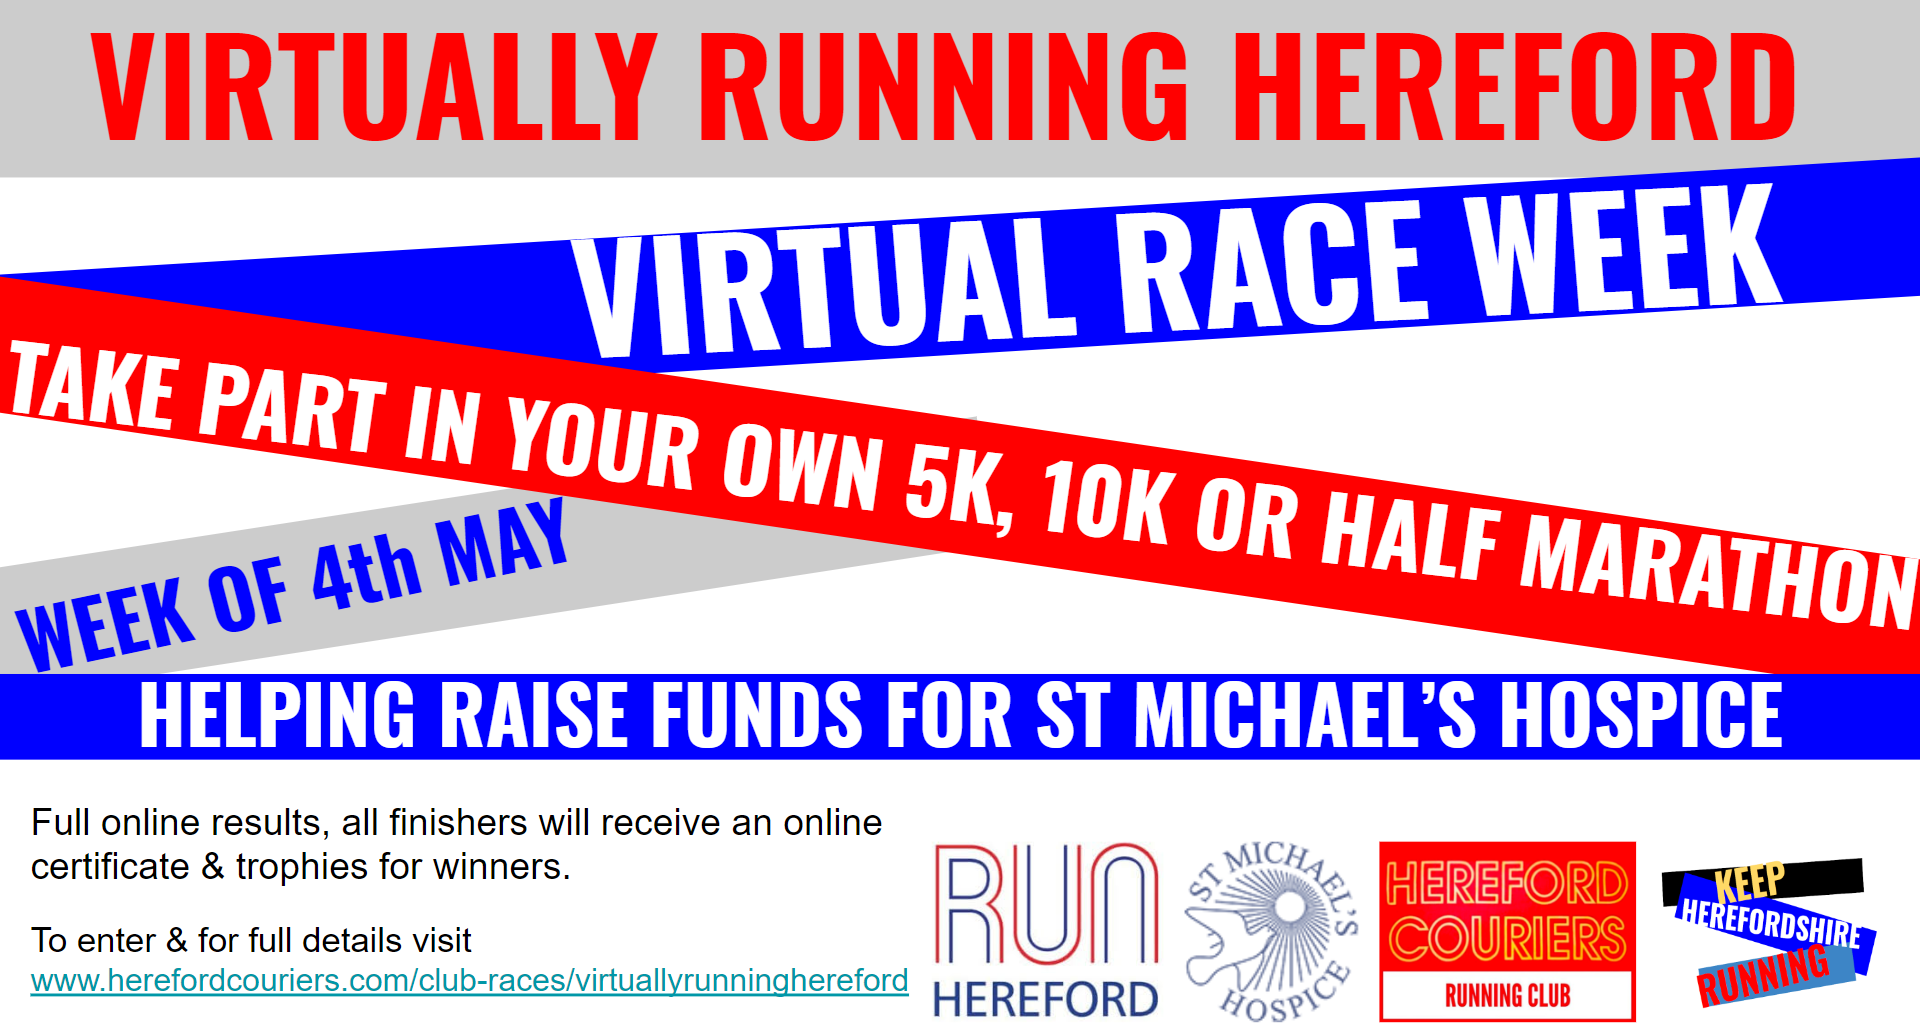 RUNNING | Hereford Couriers to run virtual race for St Michael’s Hospice